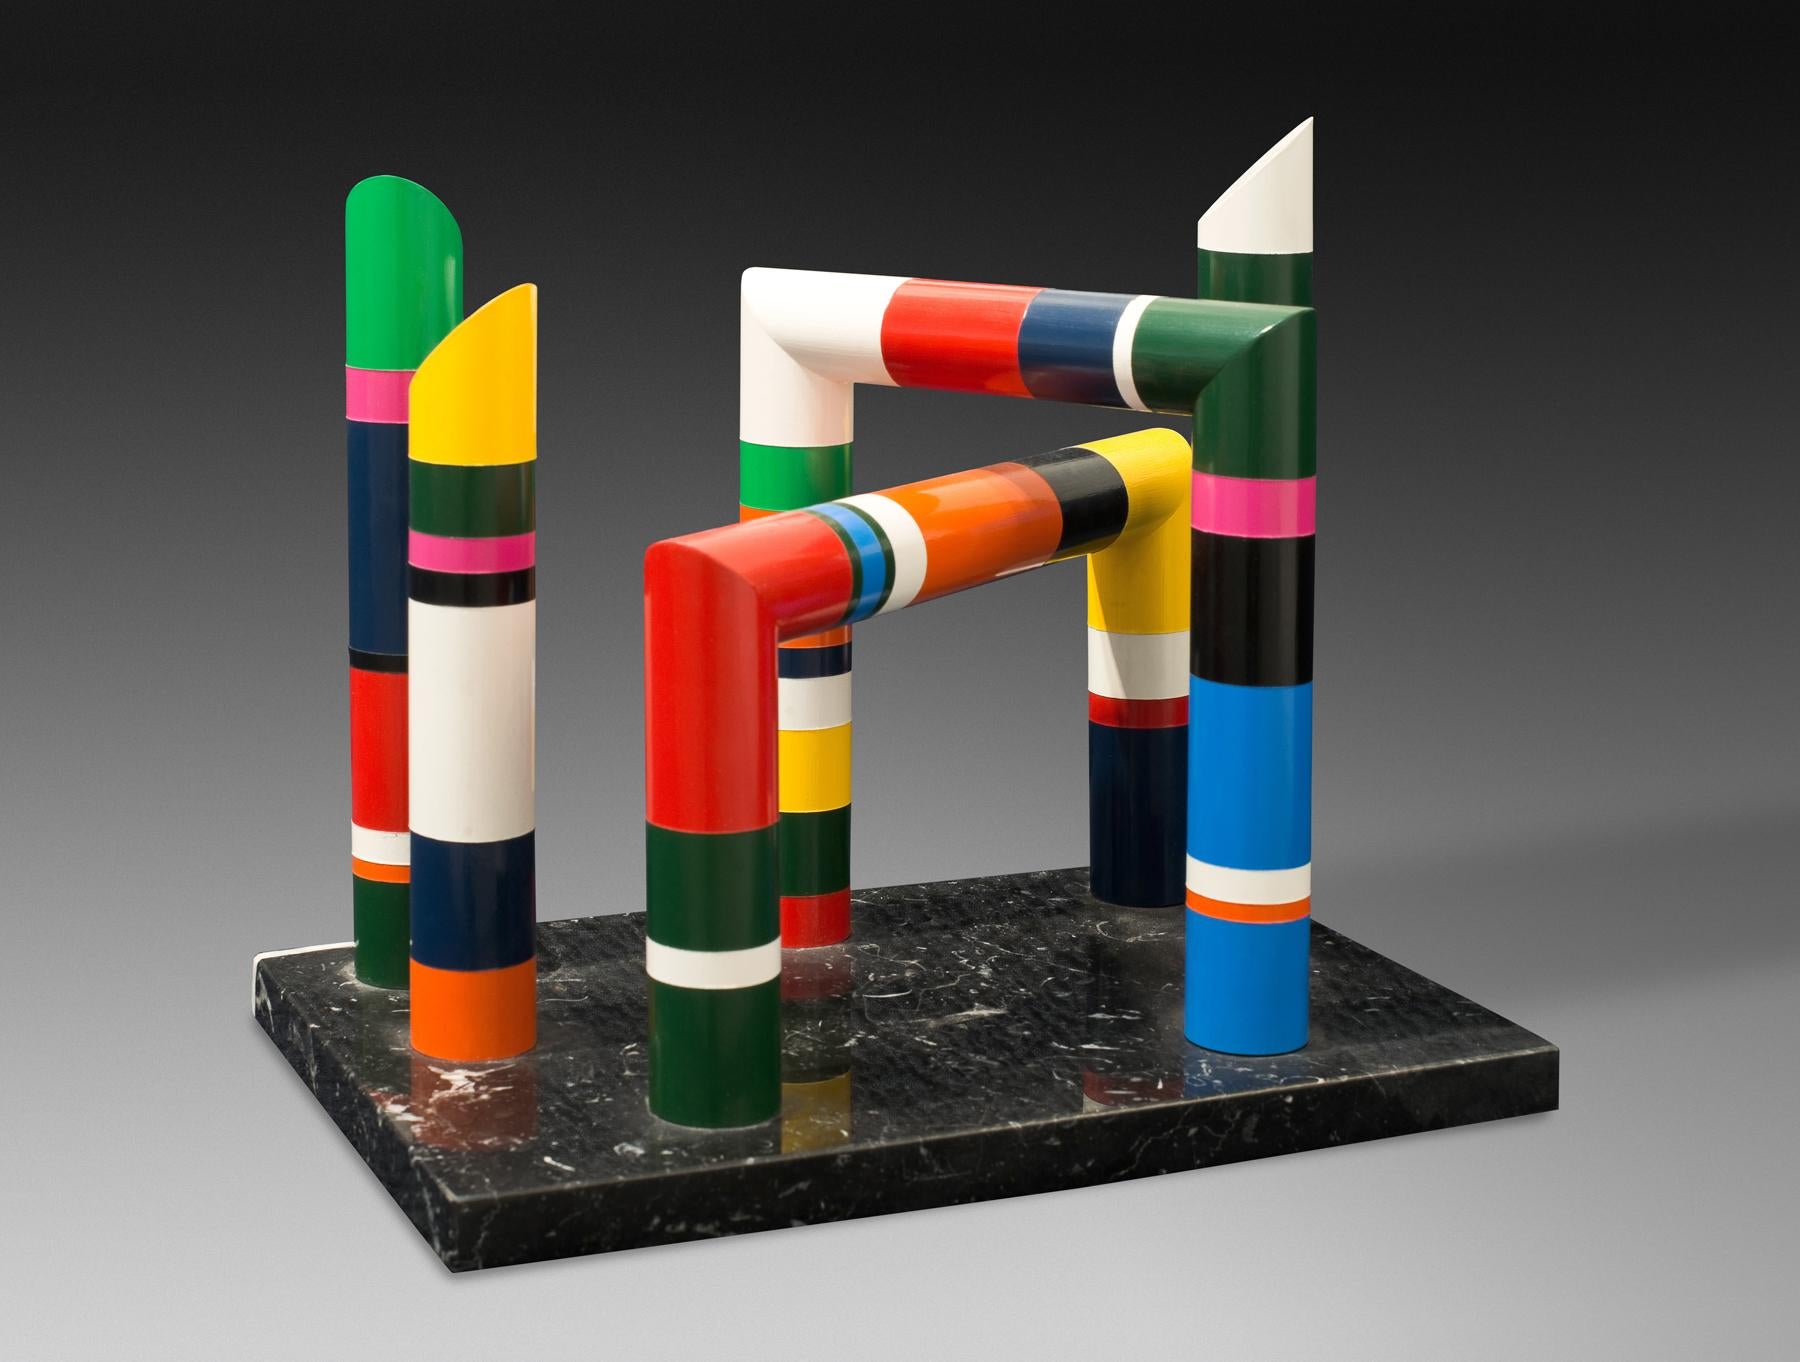 GUY DE ROUGEMONT
Sculpture colonnes de table – 1972-2006
Lacquered PVC
25 x 20 x 30 cm
9.8 x 7.8 x 11.8 in.
Edition of 8
Signed and numbered under the base